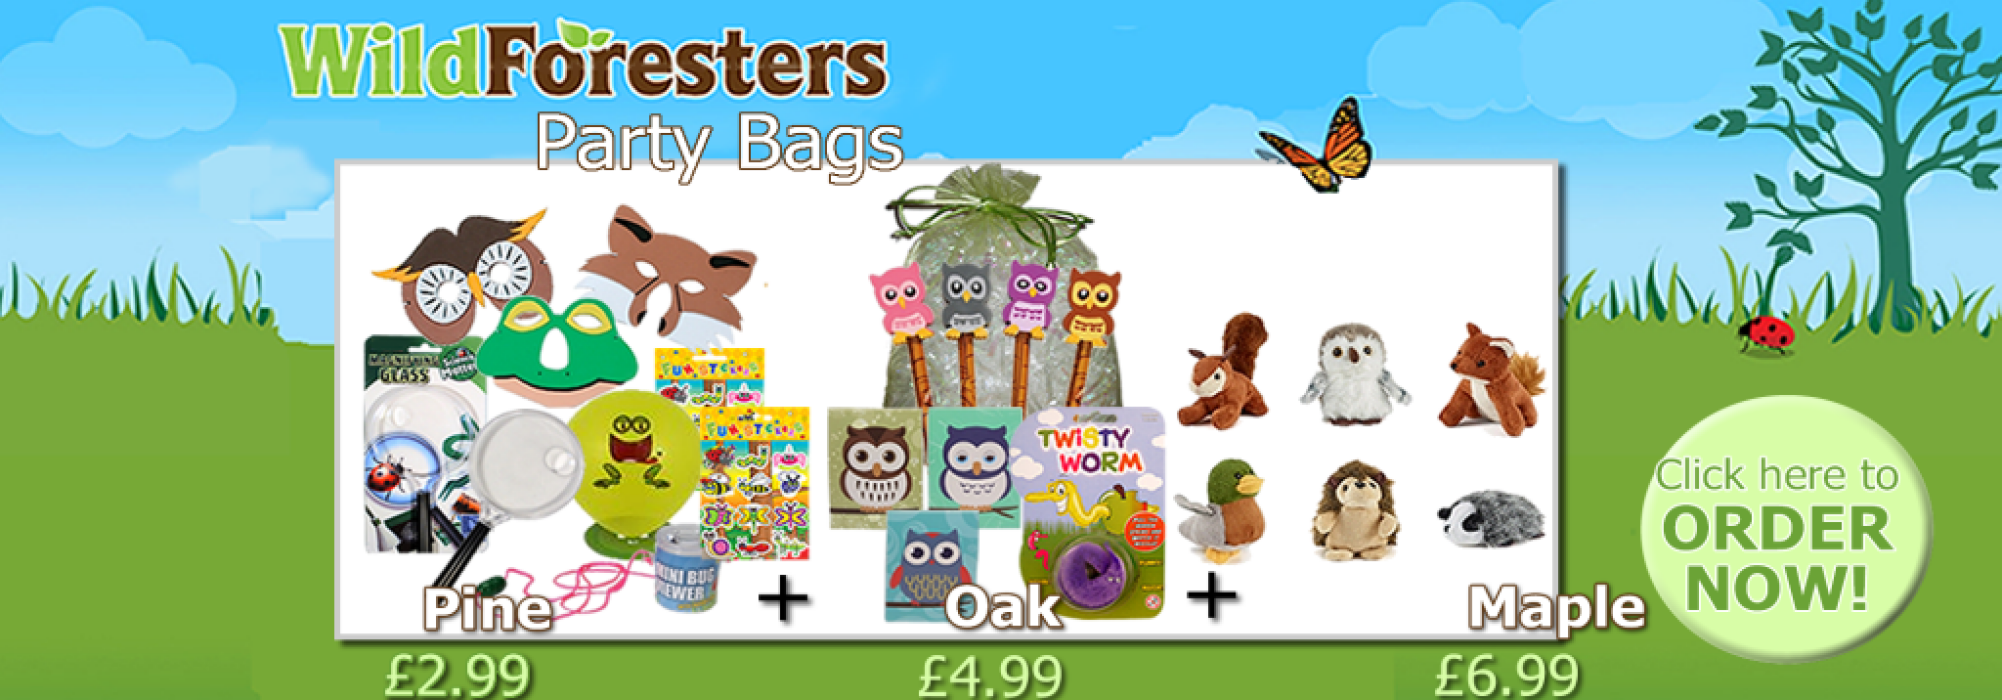 Wild Foresters Party Bags